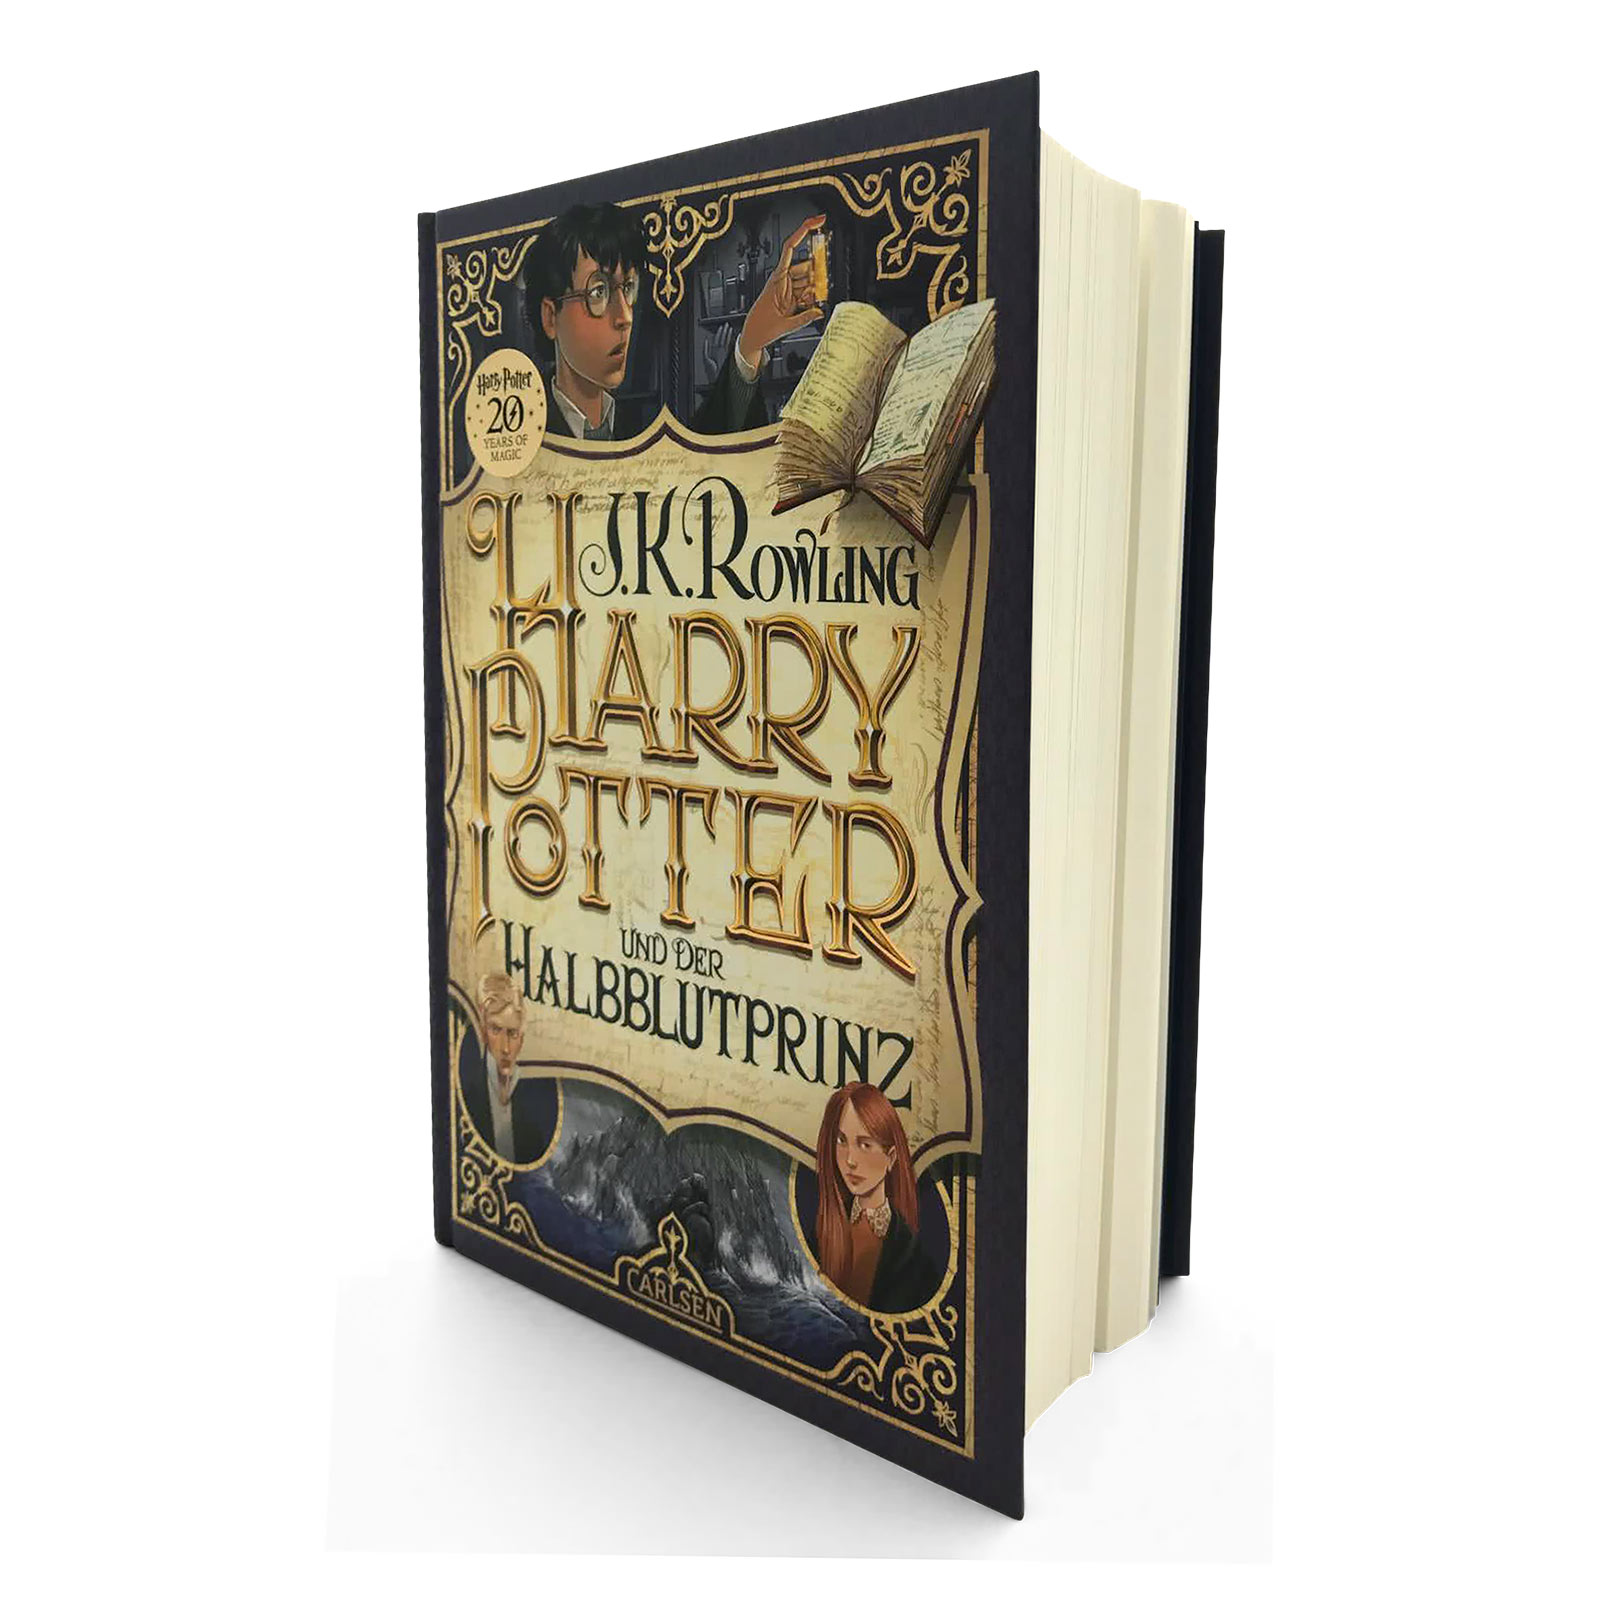 Harry Potter and the Half-Blood Prince Volume 6